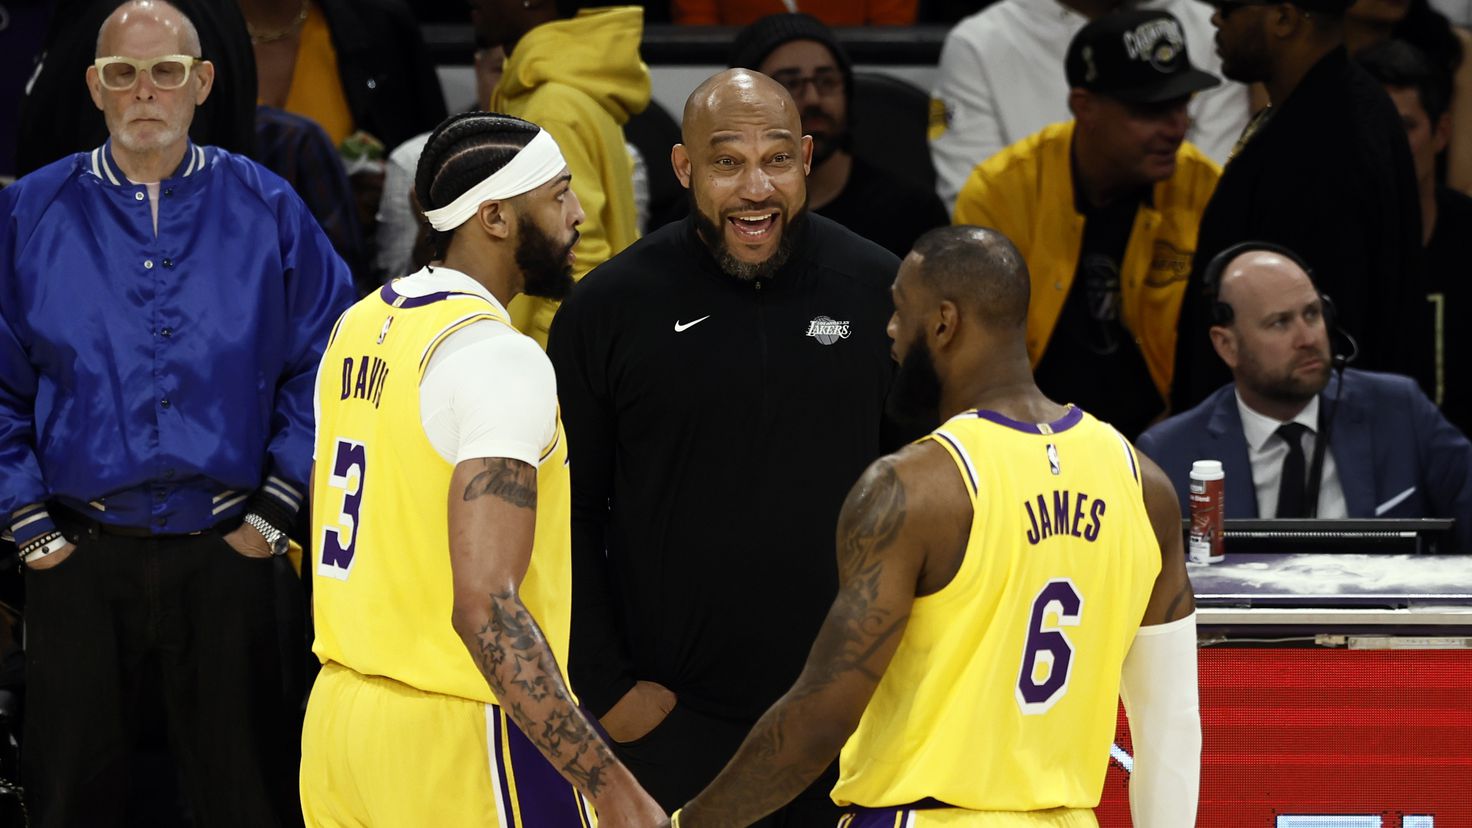 The Lakers, on the brink of the abyss: win or die
